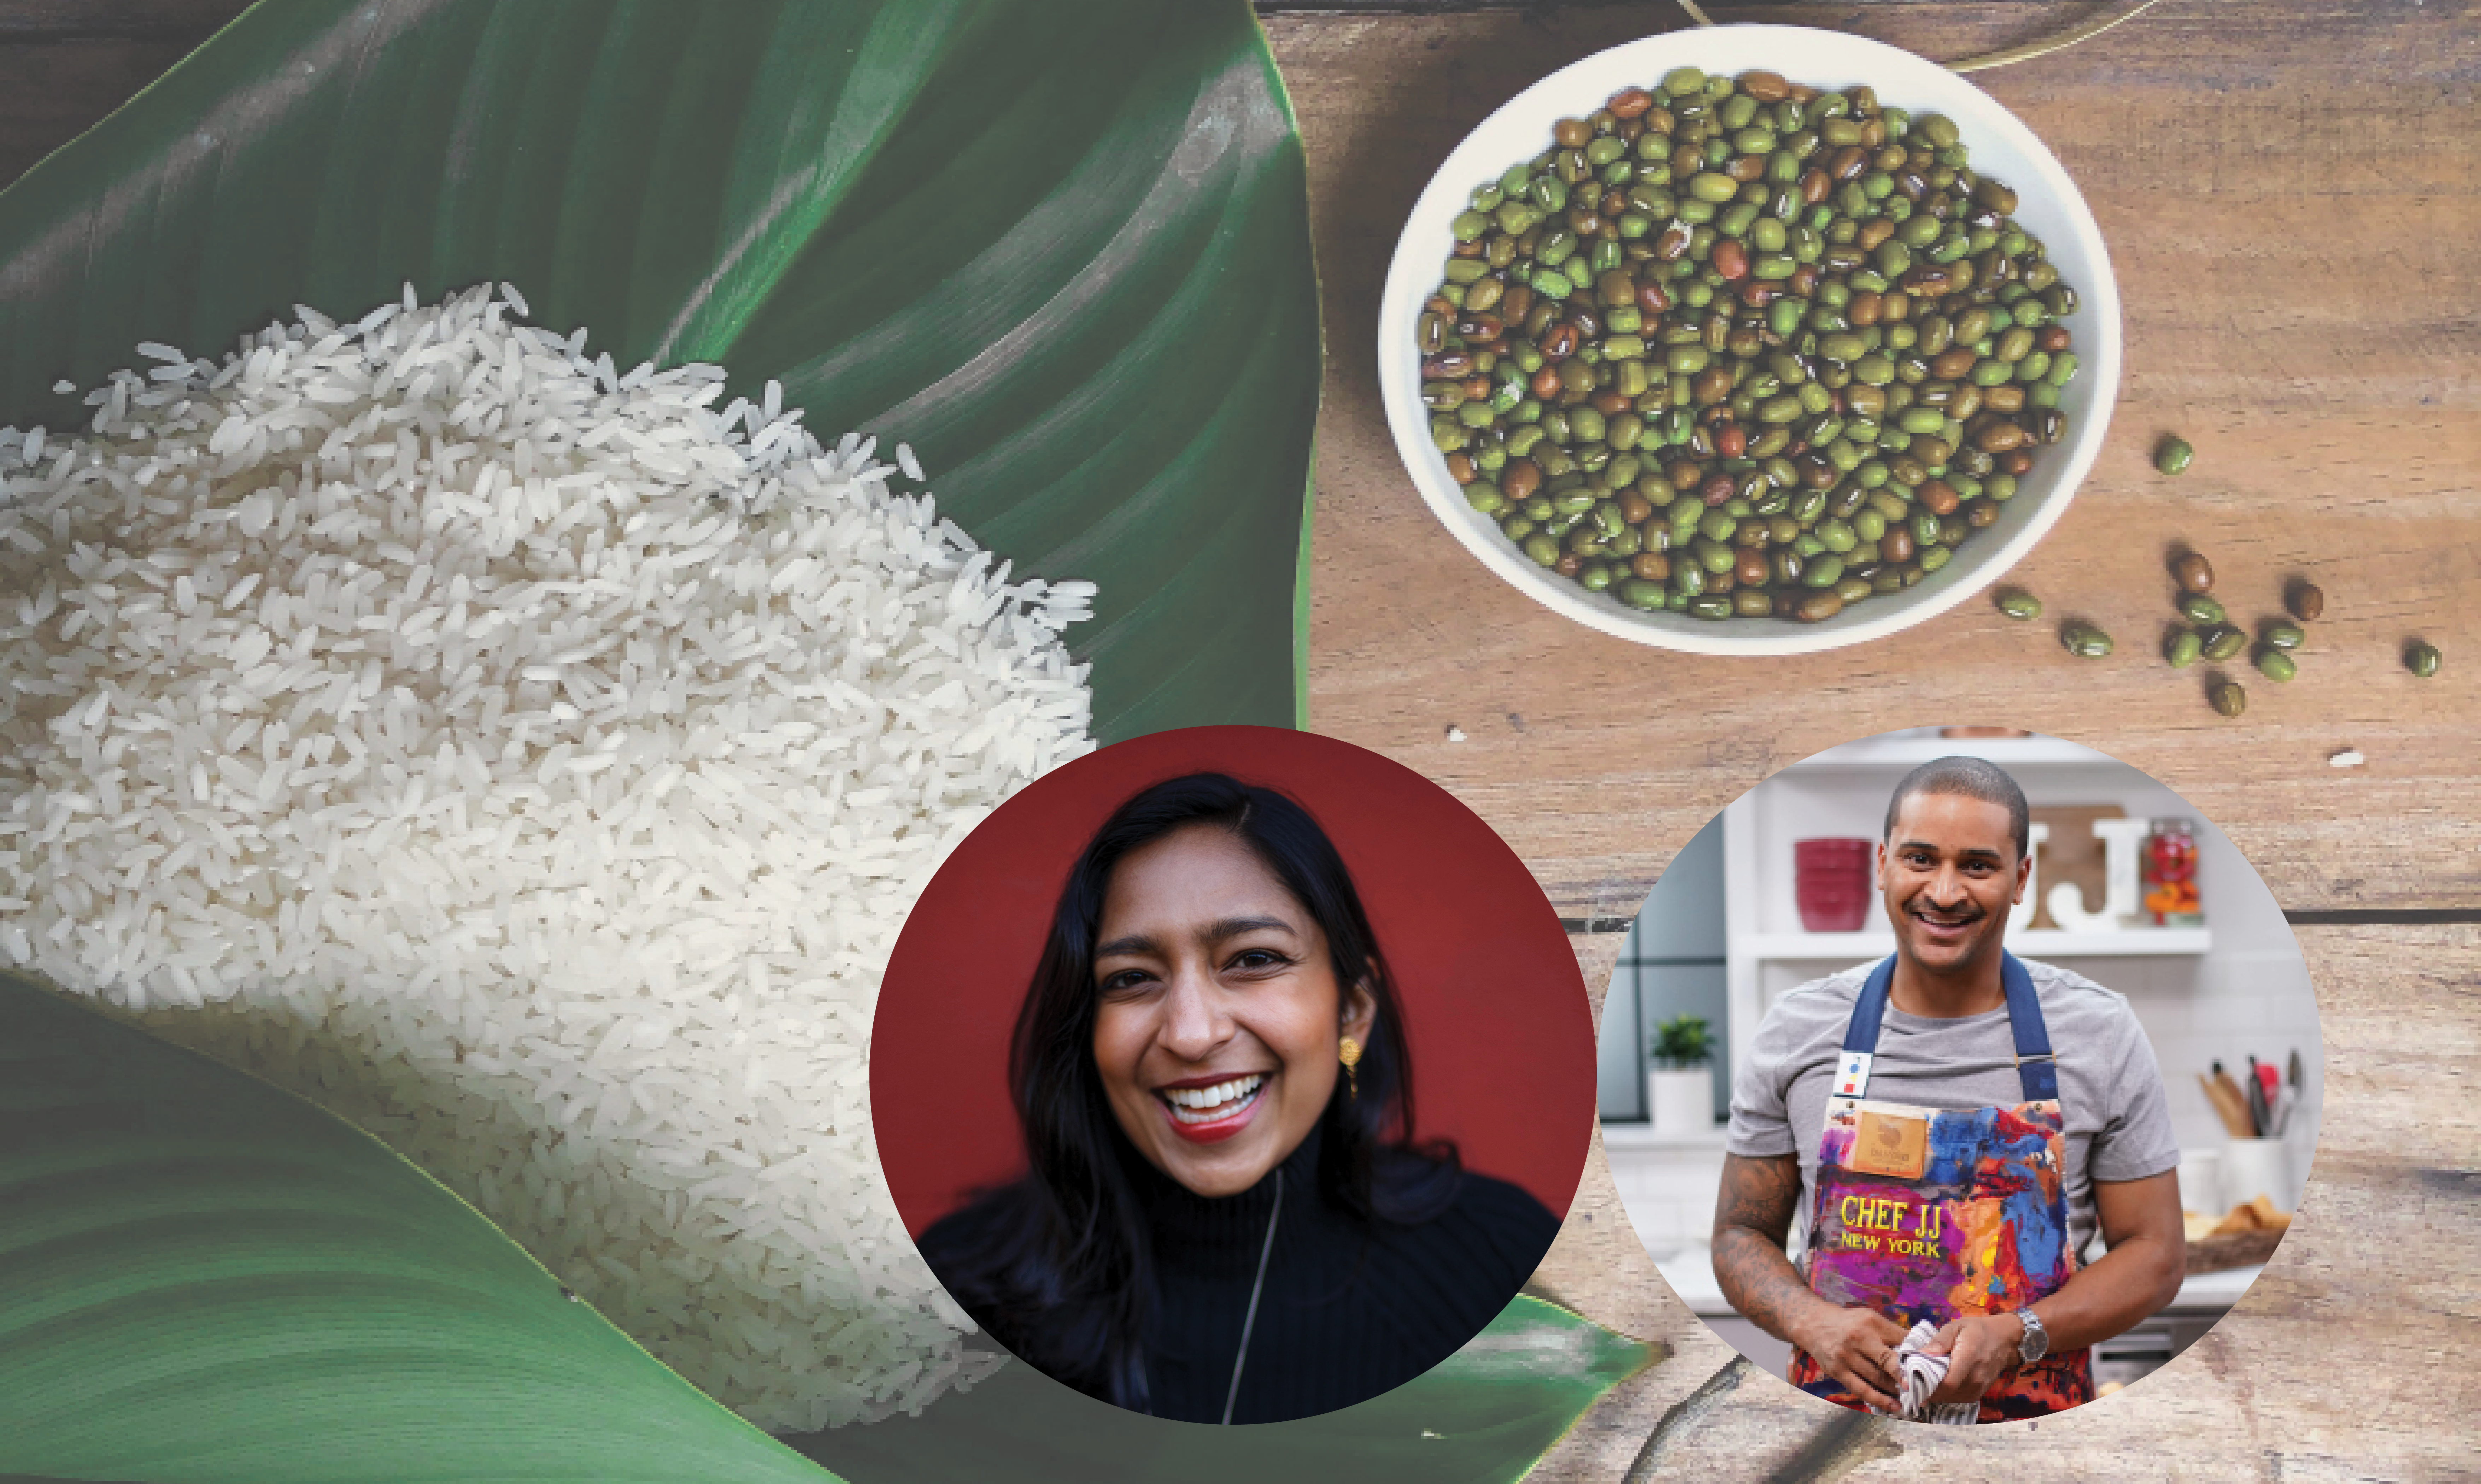 A pile of uncooked white rice on top of a green leaf. To the right is a bowl of uncooked beans. On the lower right corner is a headshot of Chef JJ Johnson and Priya Krishna